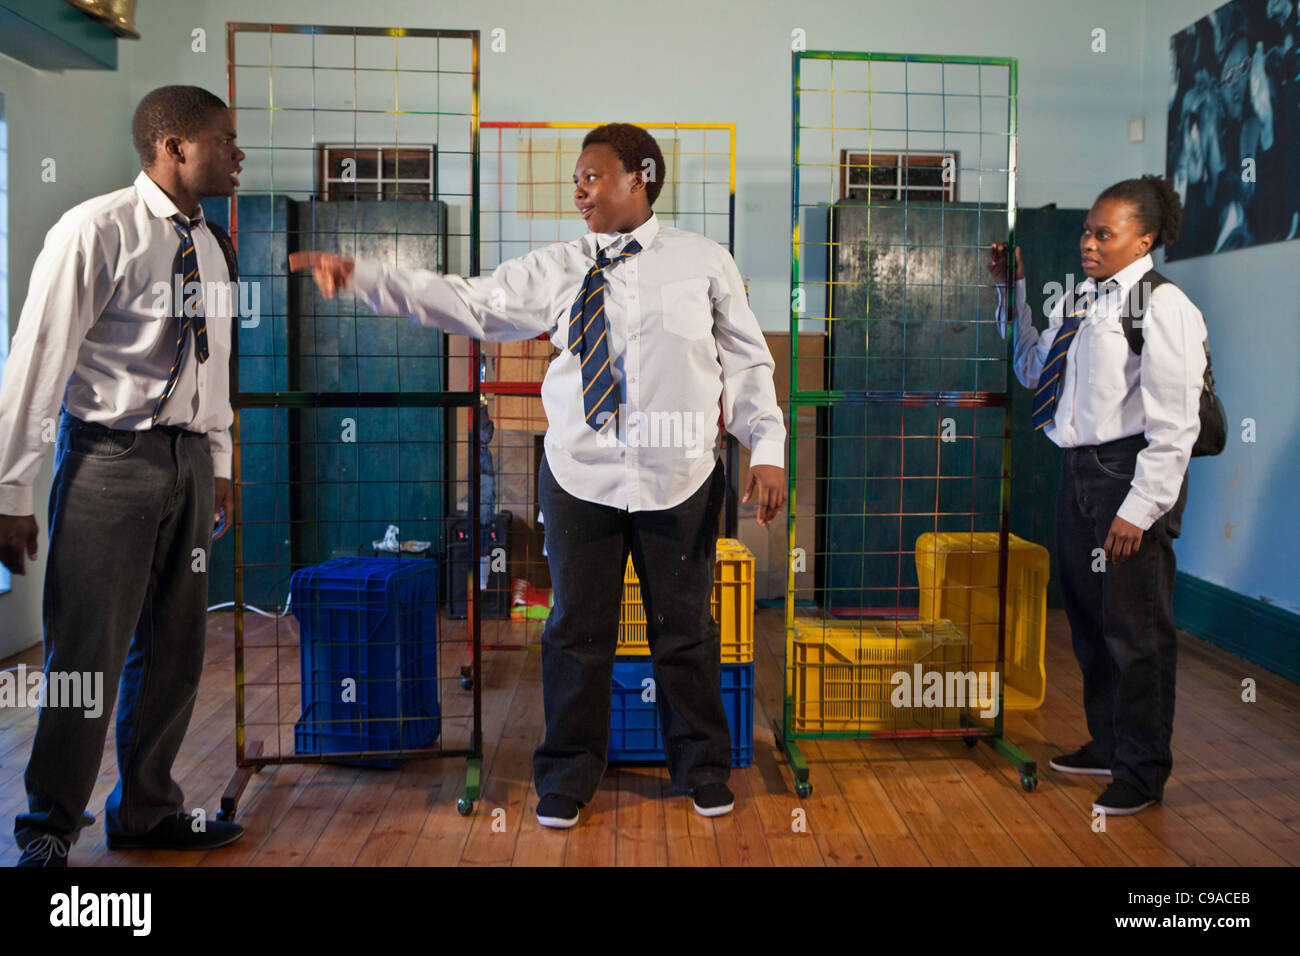 Theatre for Life actors with pupils of Ithute primary school, Johannesburg. Children in education learning social skills. Stock Photo